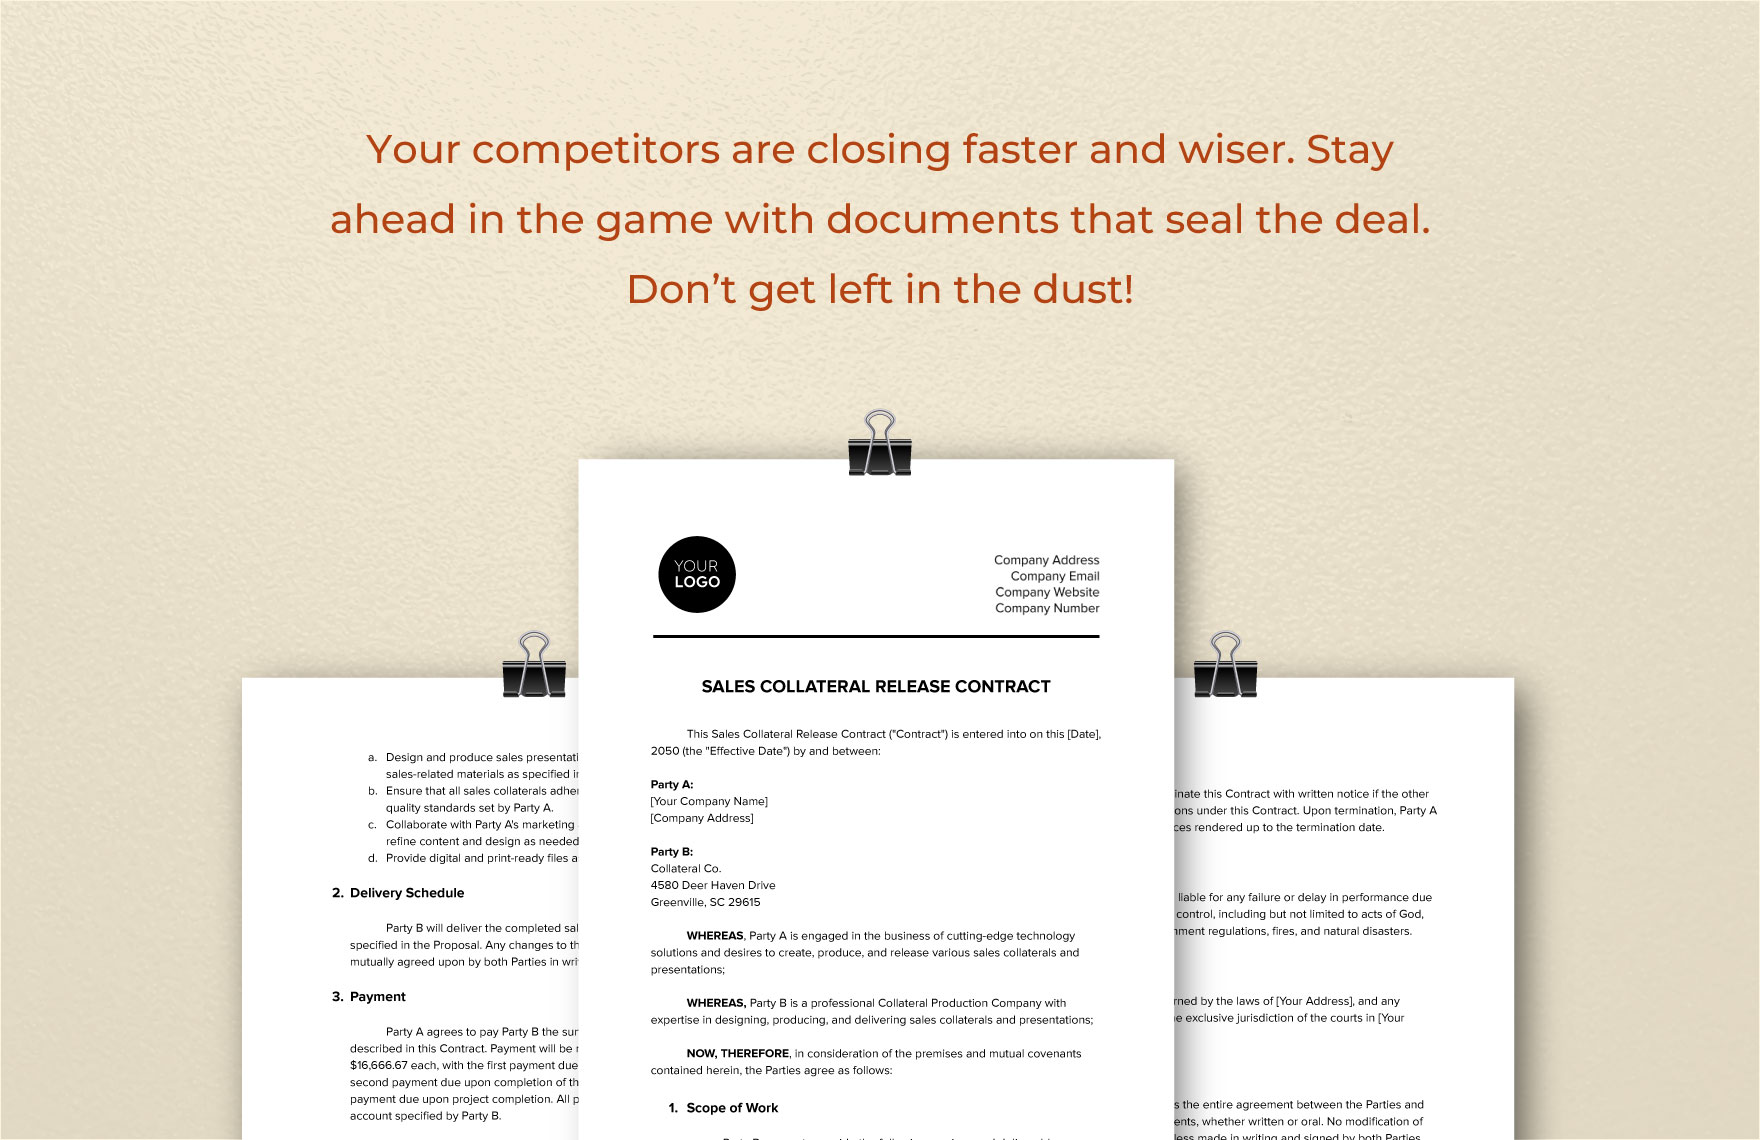 Sales Collateral Release Contract Template